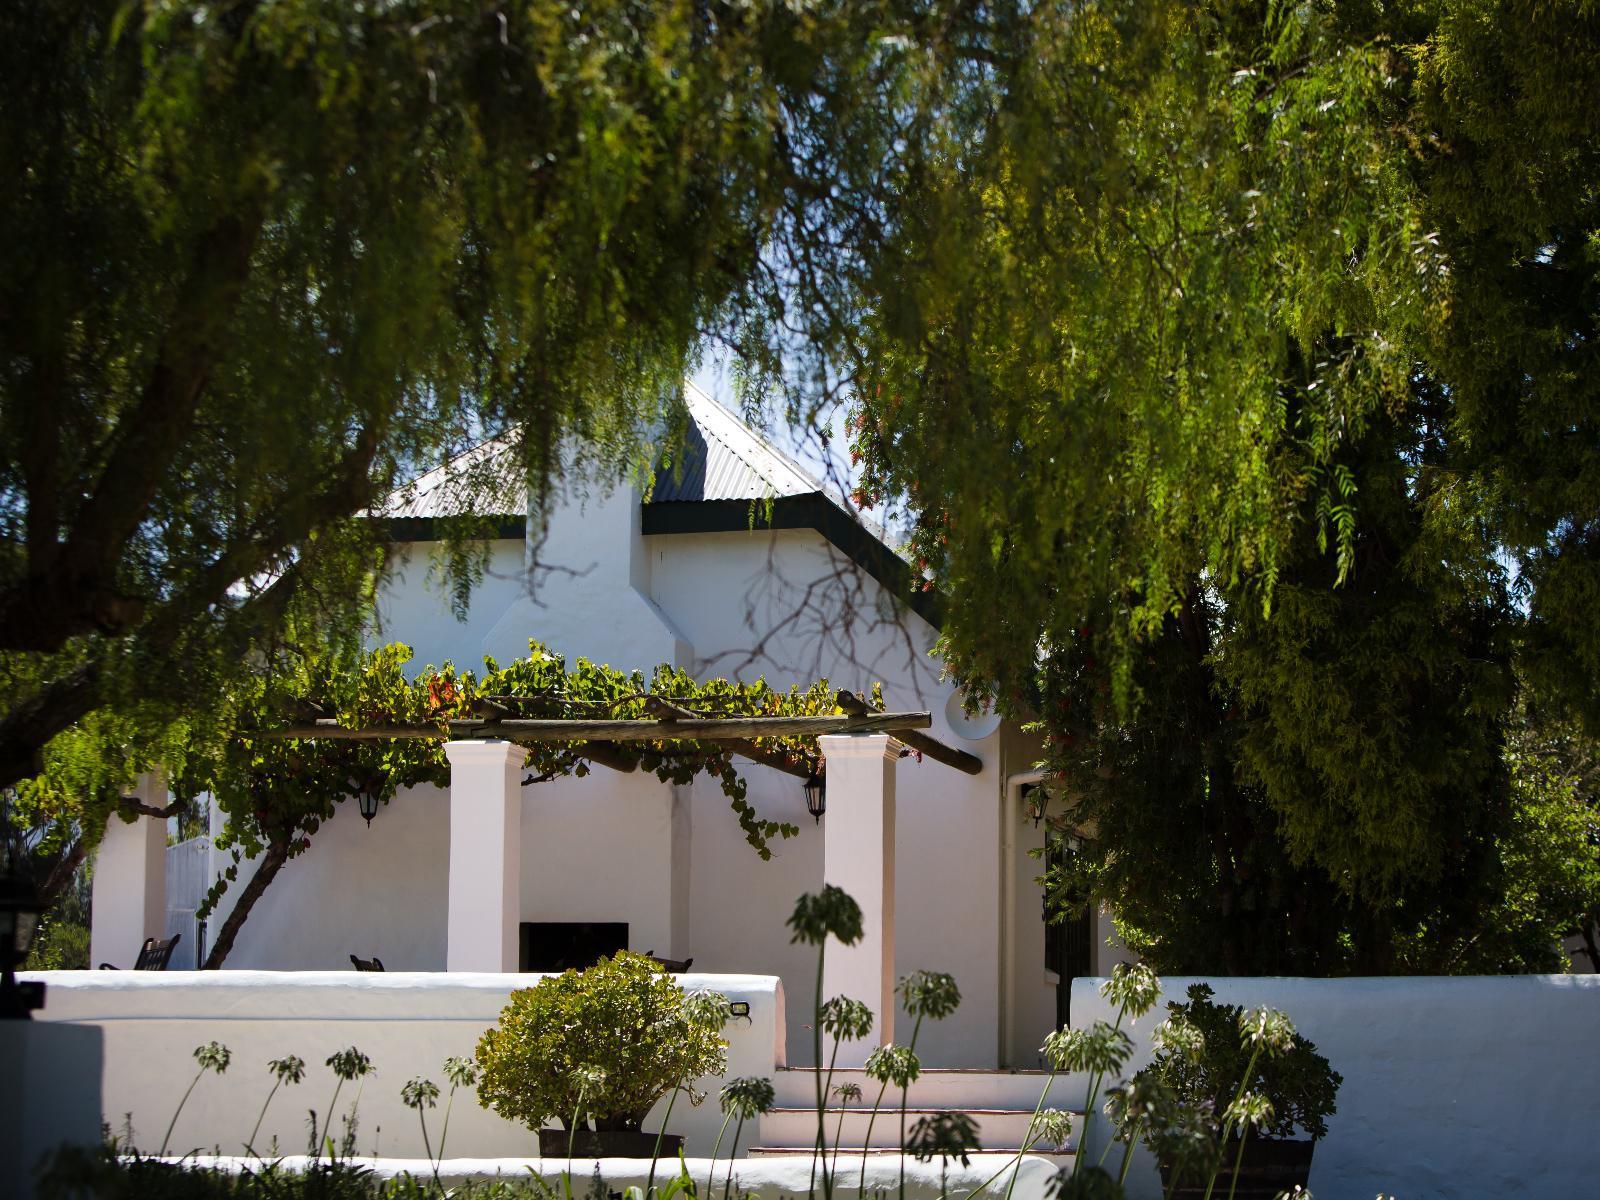 Manley Wine Lodge Tulbagh Western Cape South Africa House, Building, Architecture, Palm Tree, Plant, Nature, Wood